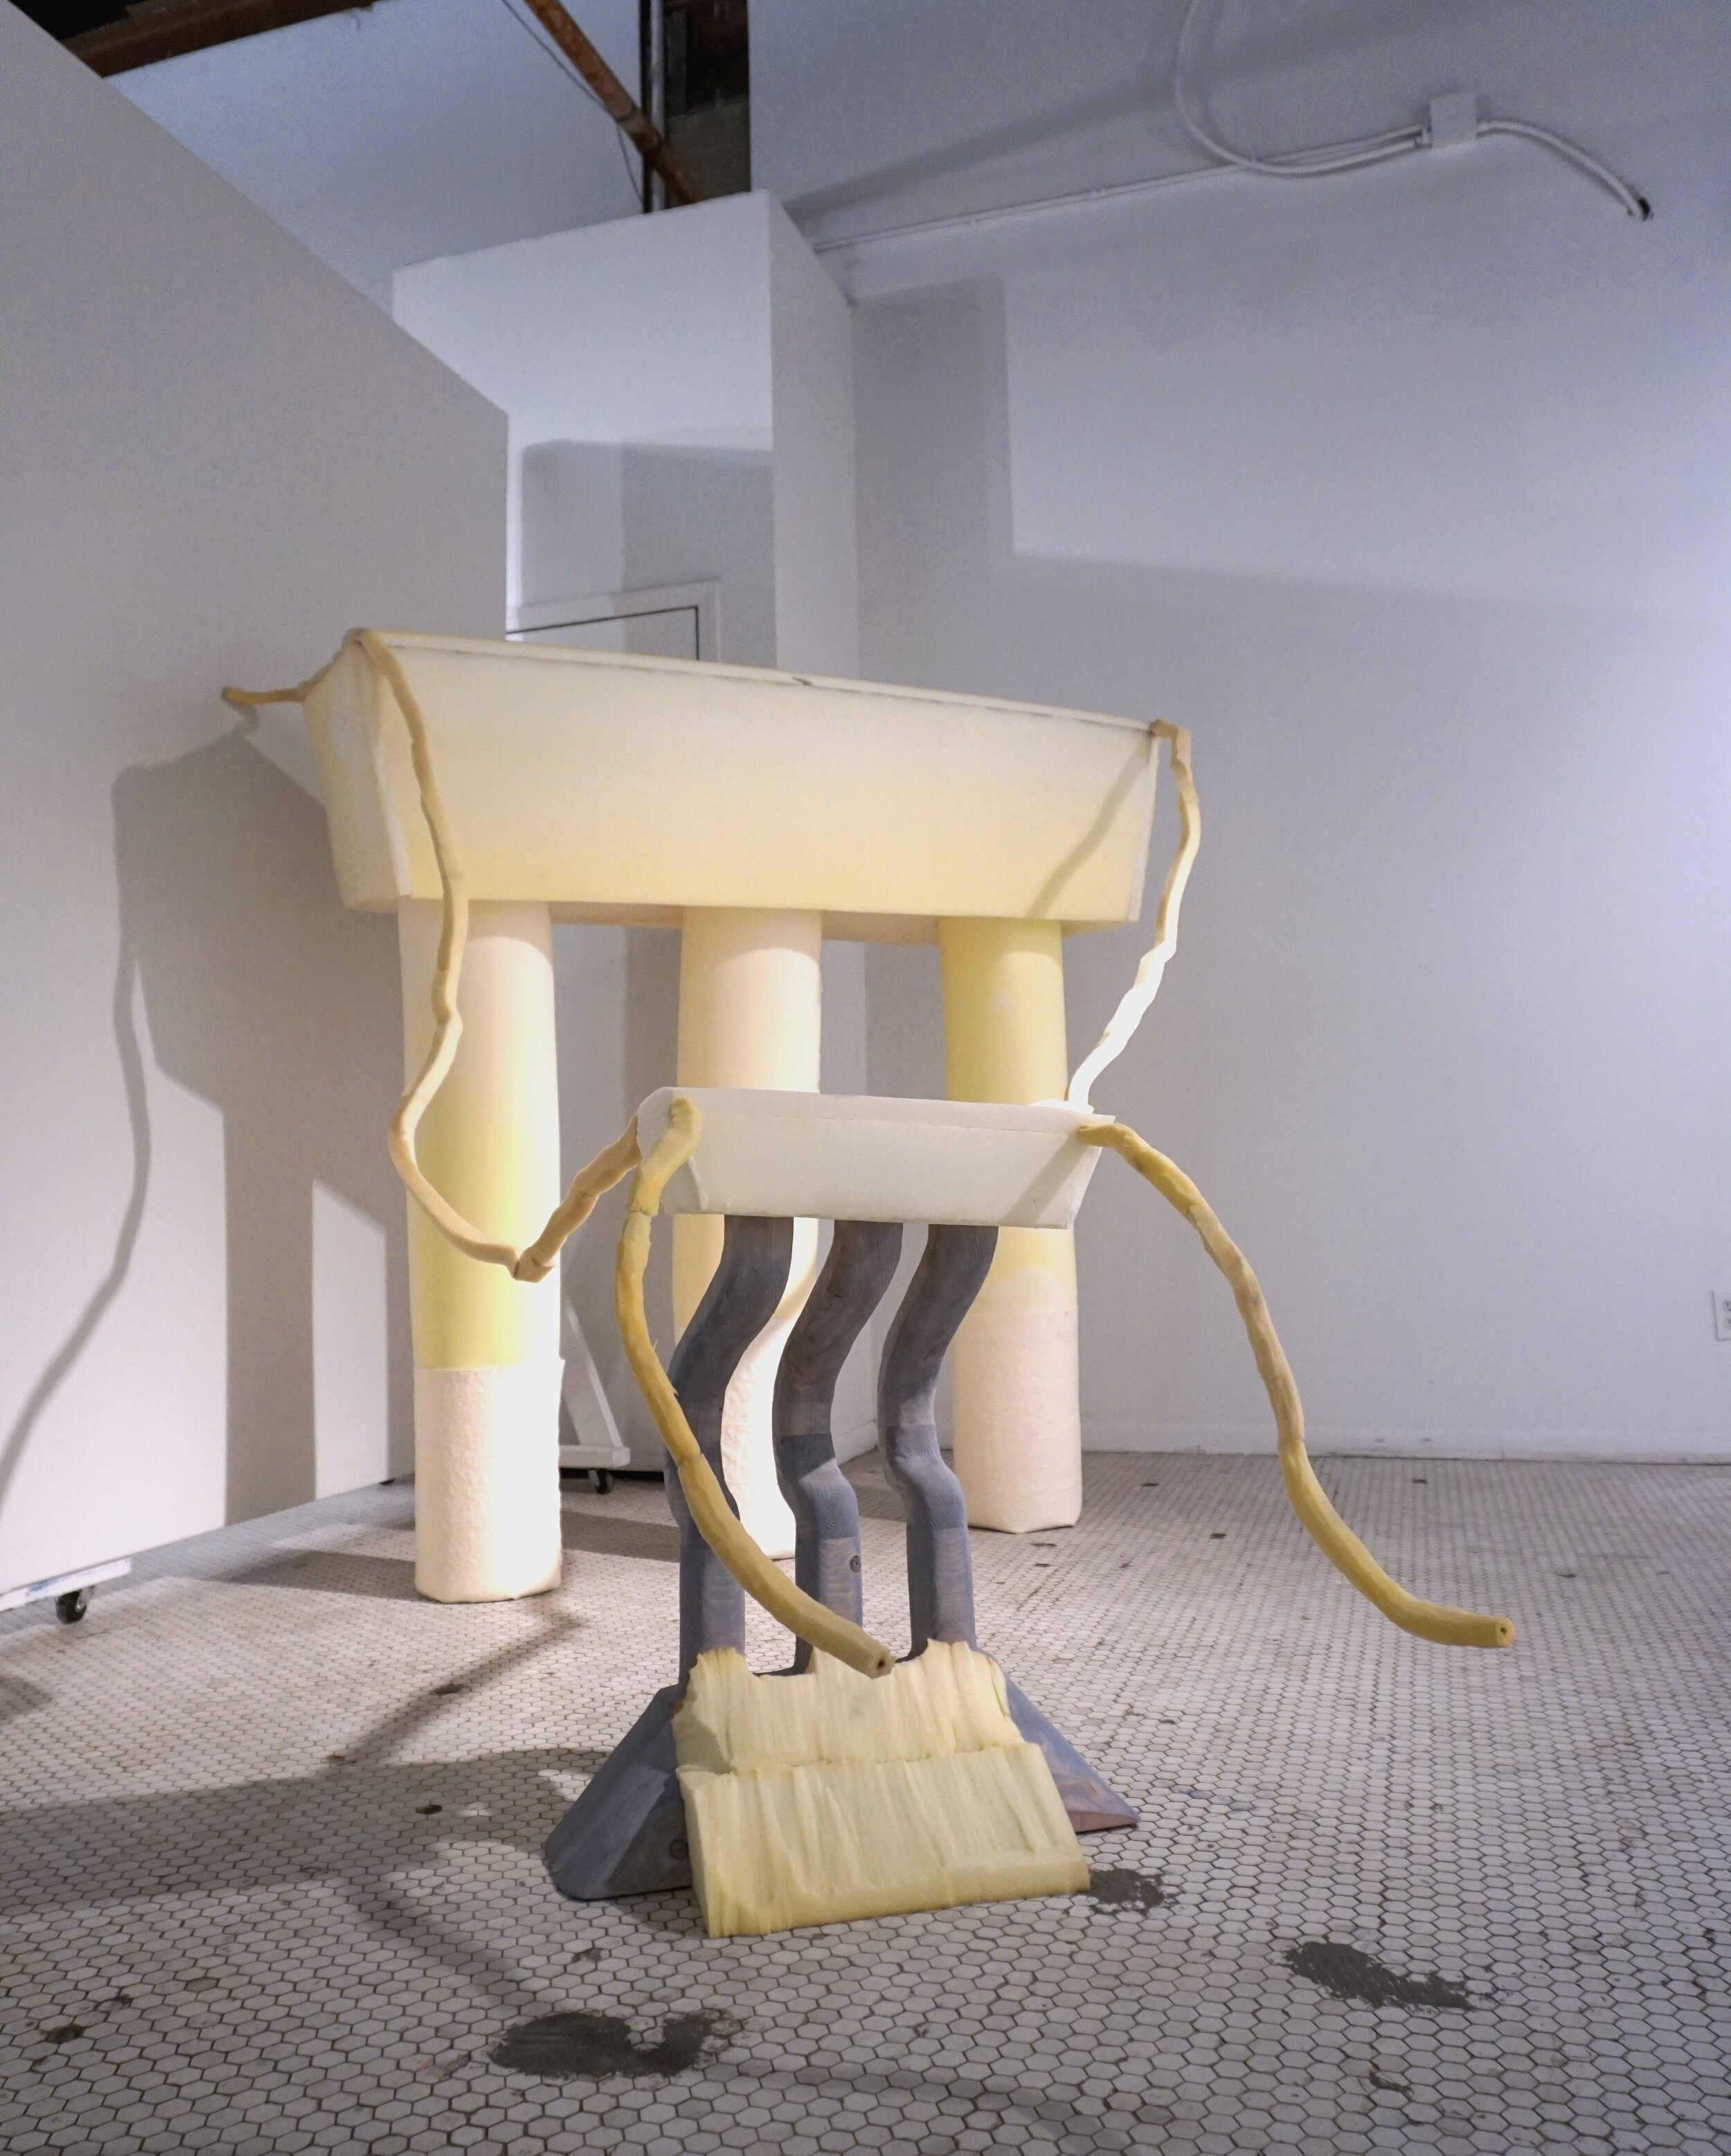 'Highway (installation)', upholstery foam, wood, wire, 2019